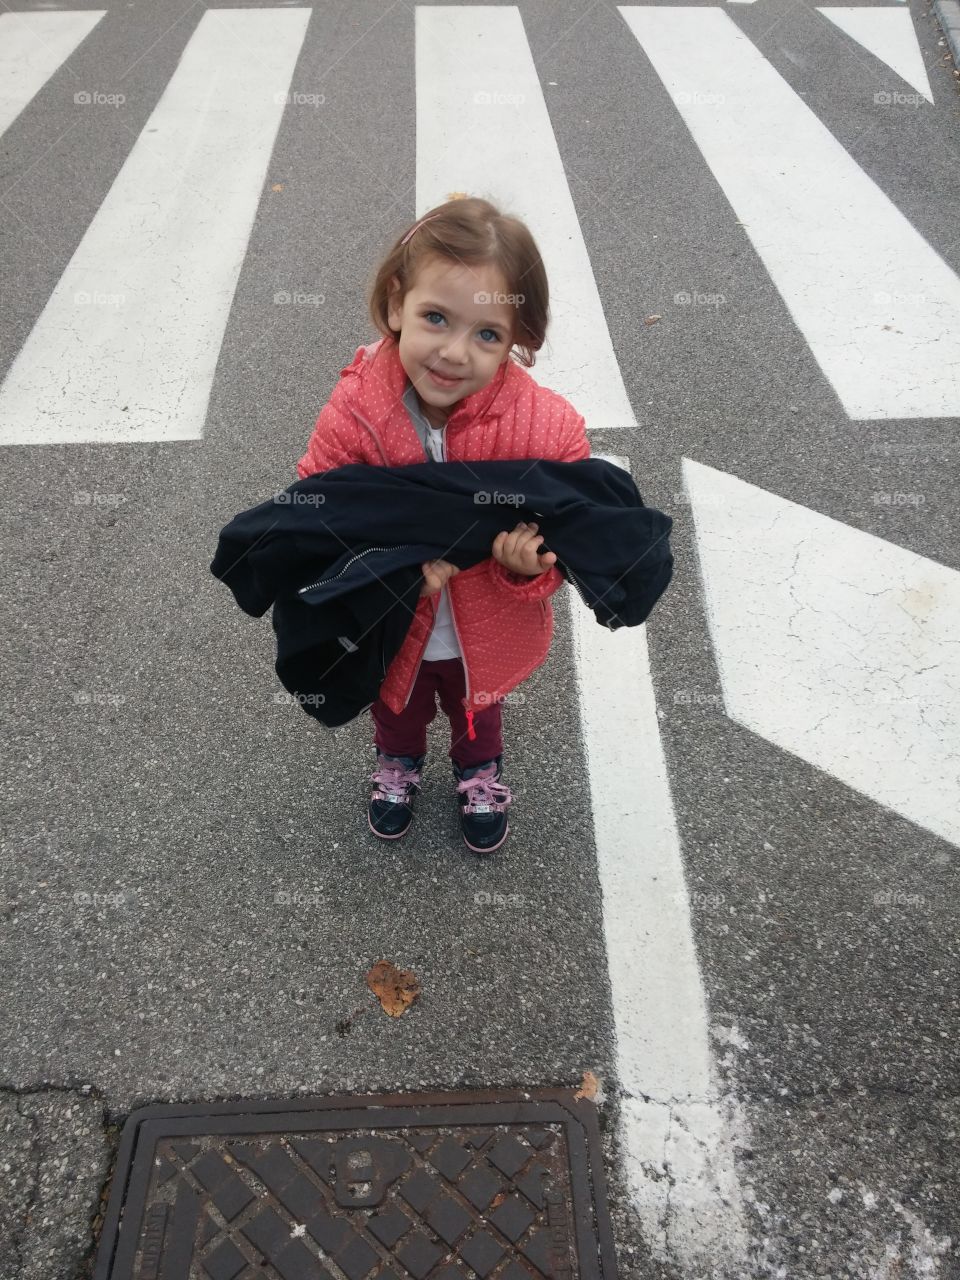 A little girl holding jacket standing on road